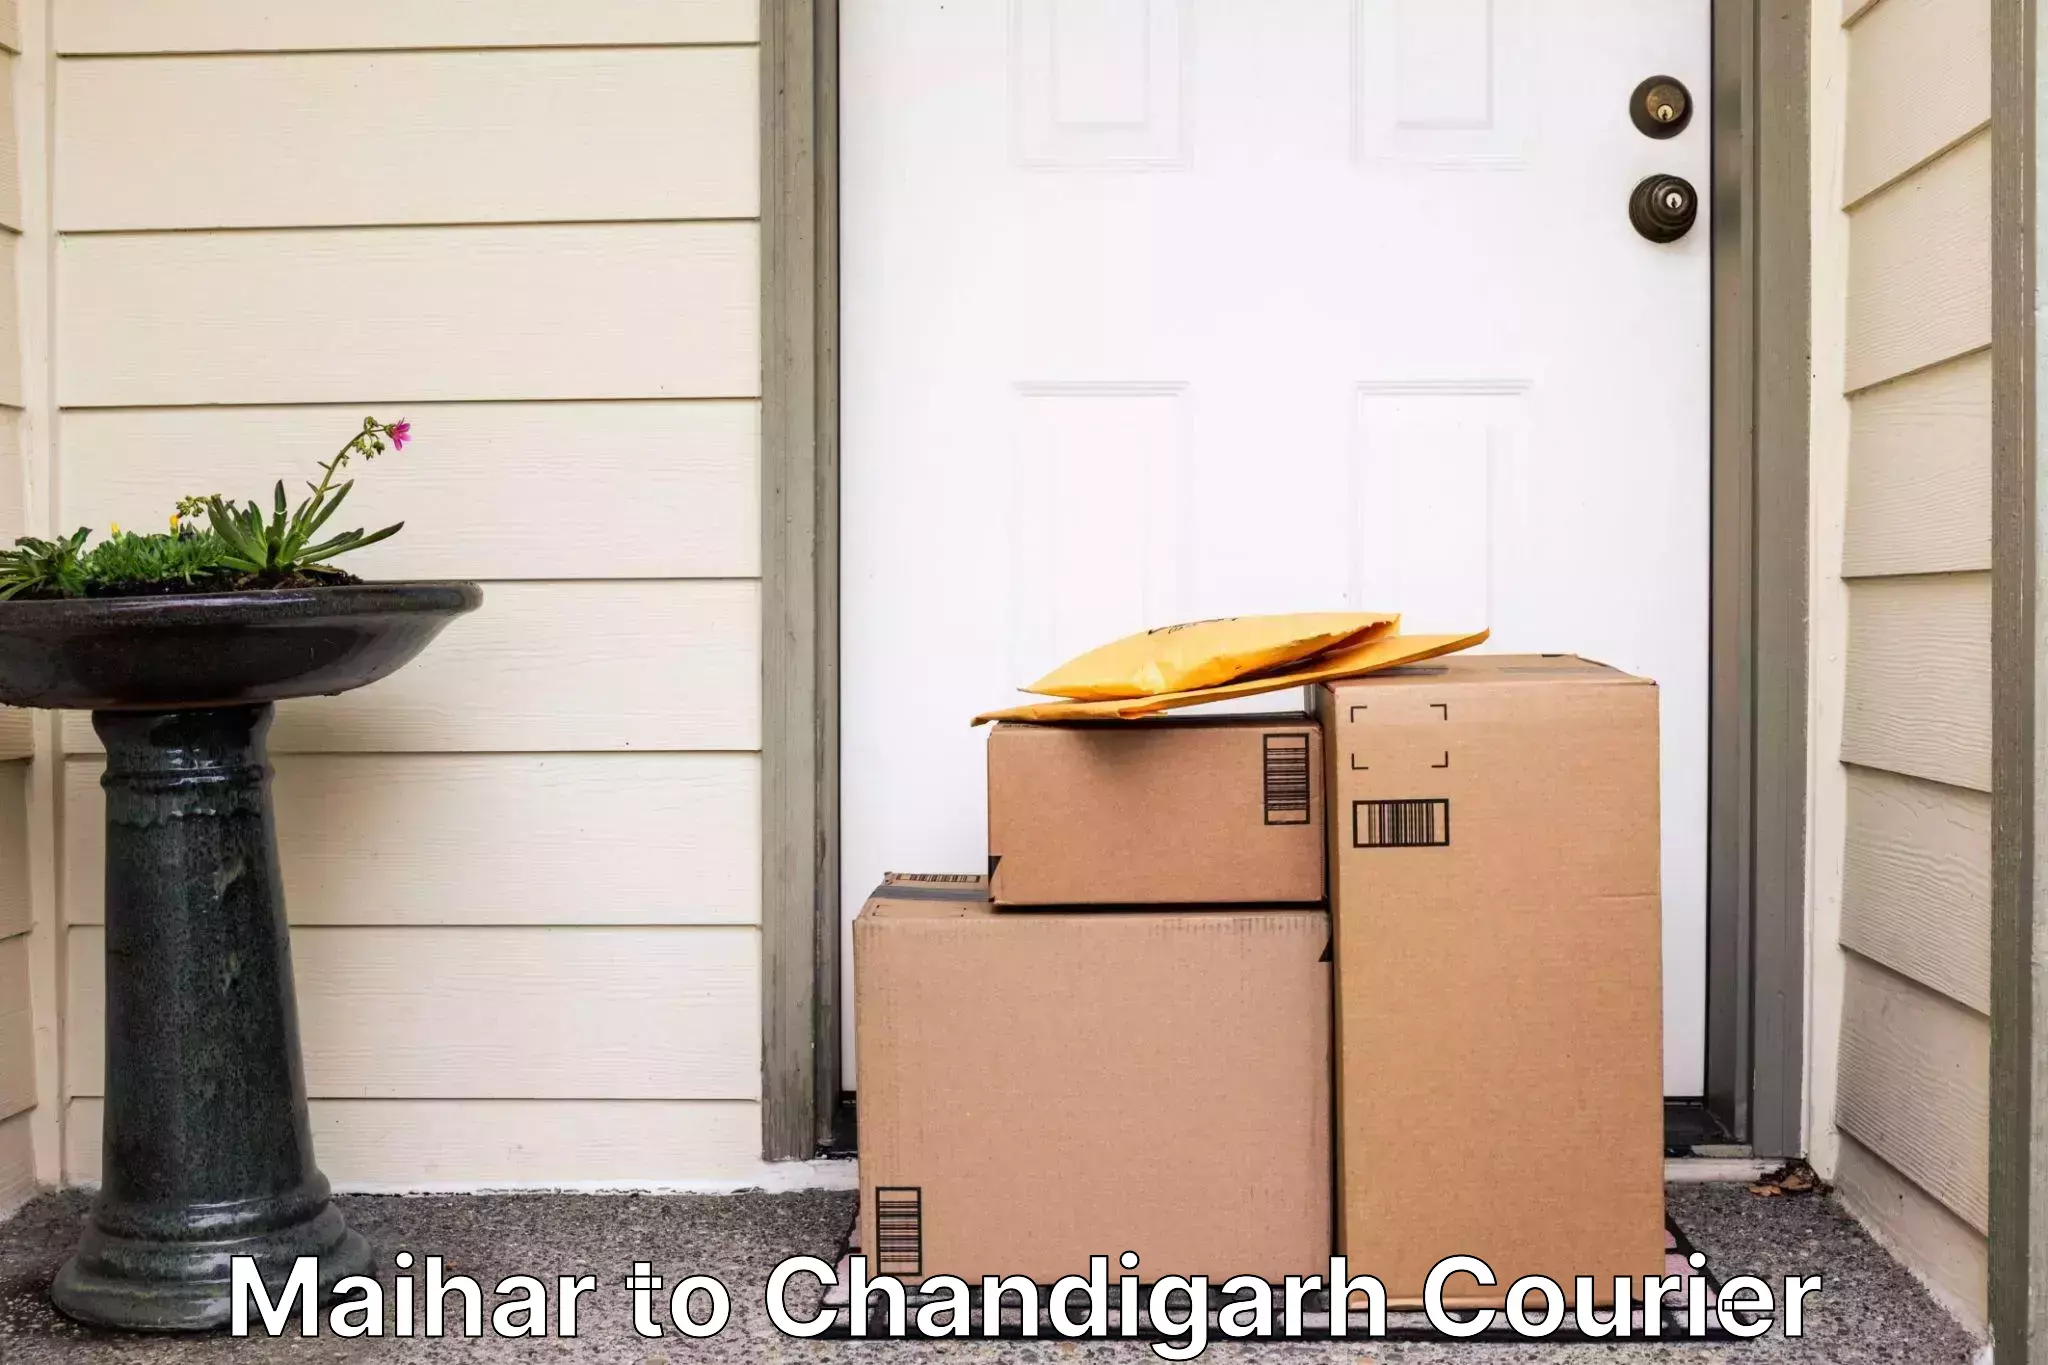 Fastest parcel delivery Maihar to Chandigarh